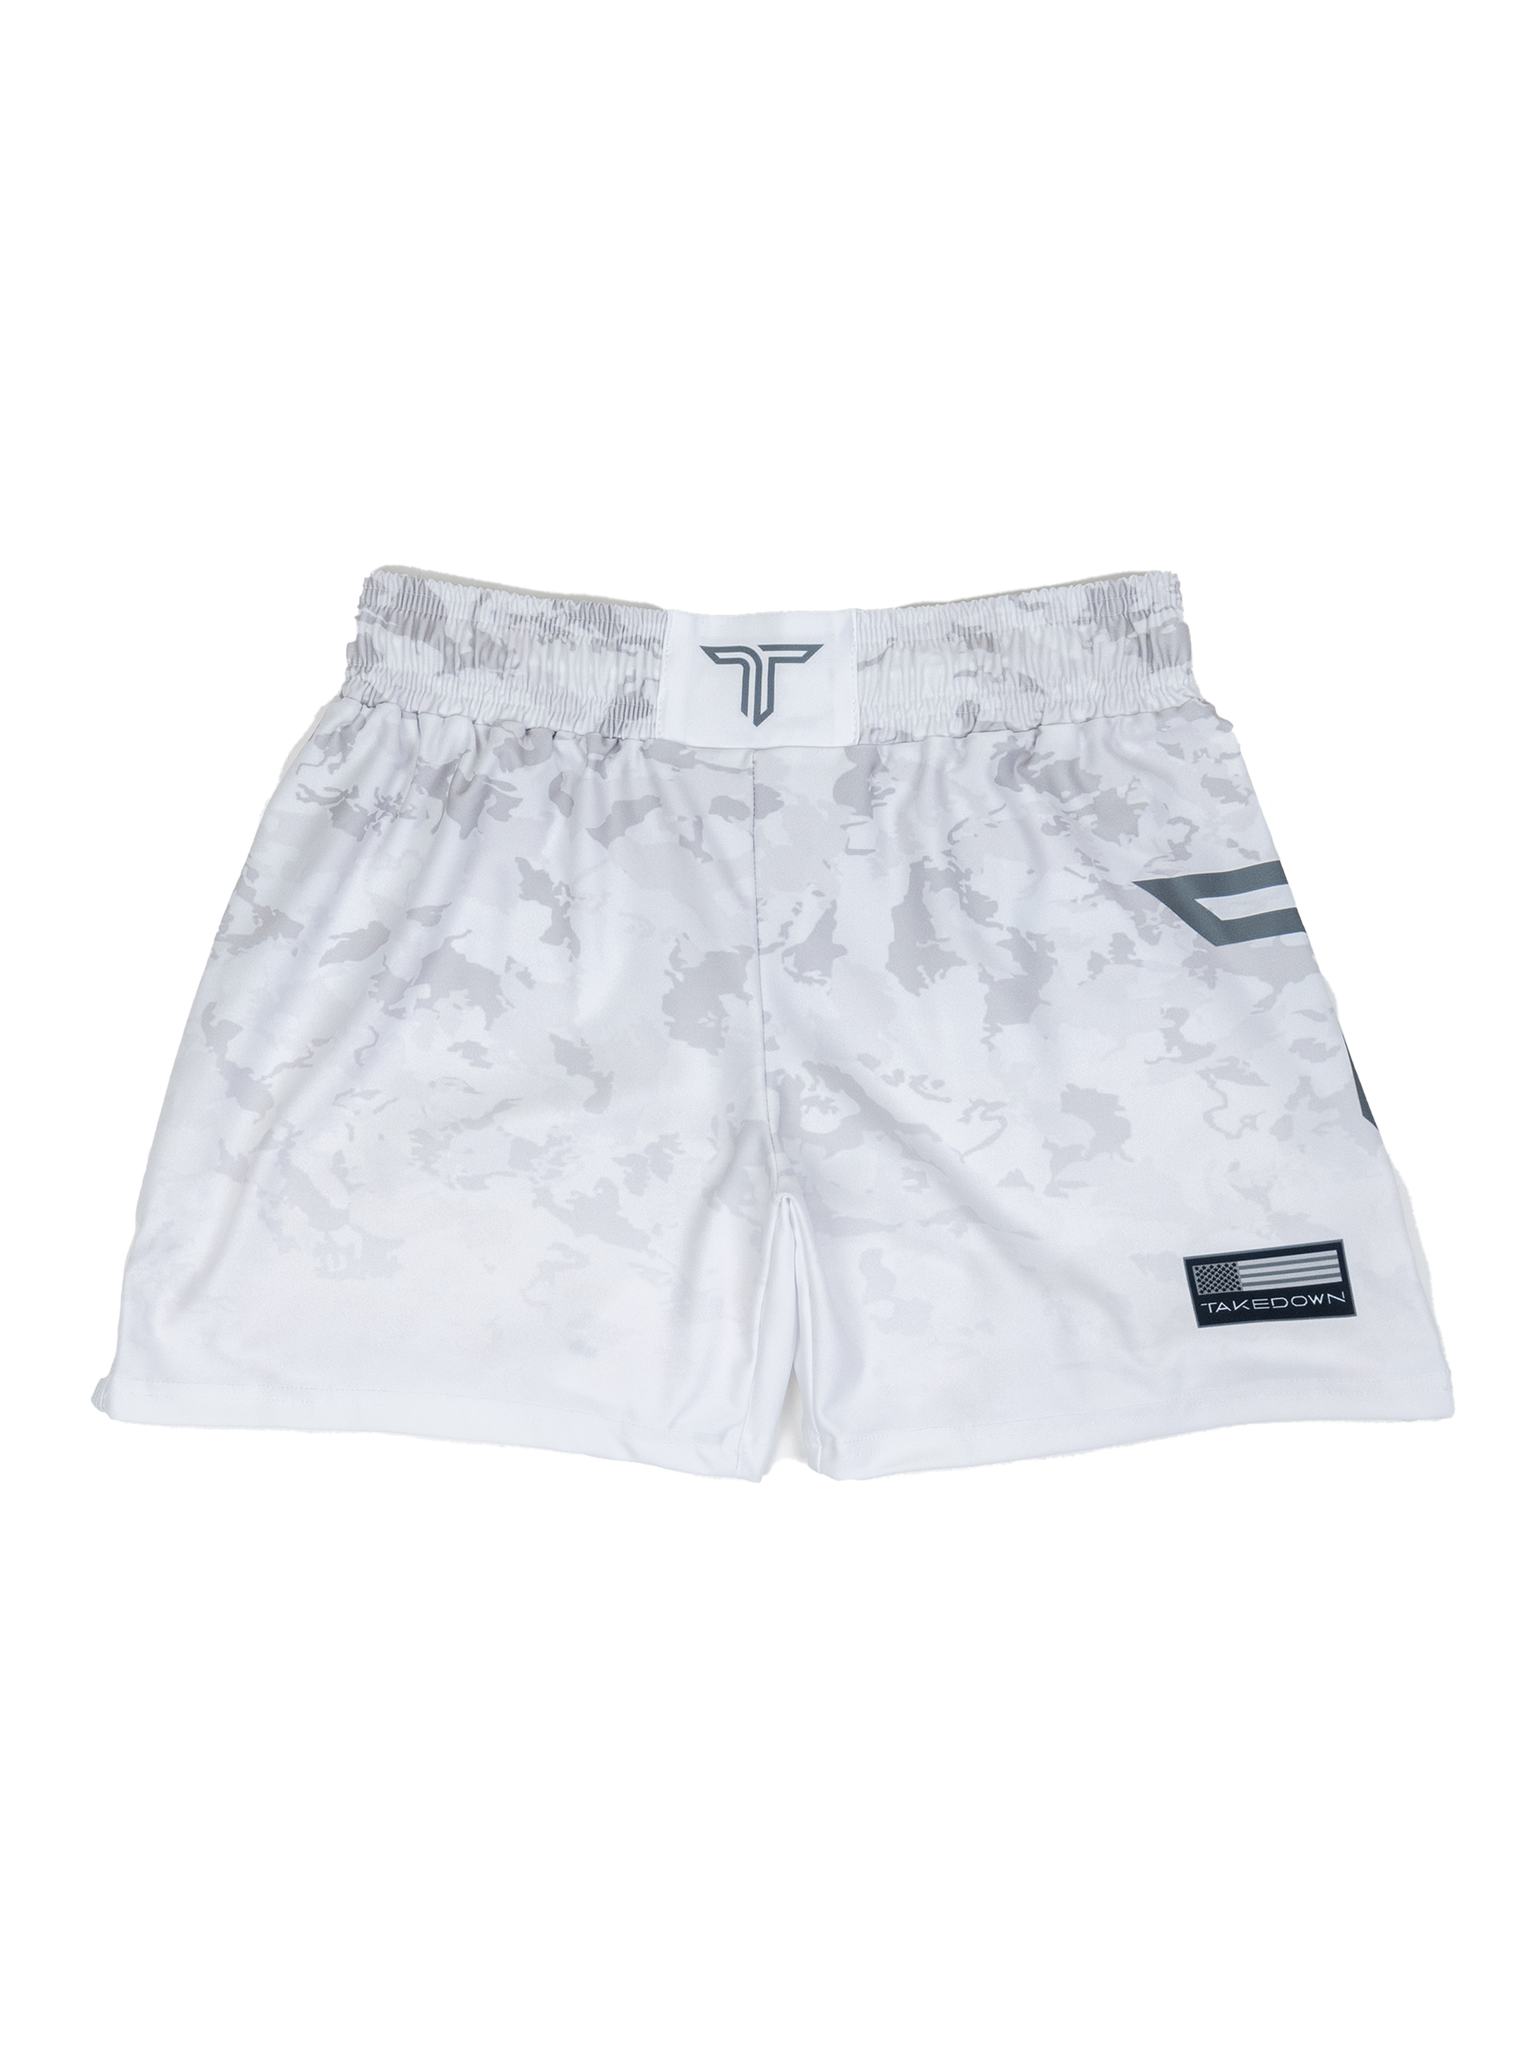 Particle Camo Fight Shorts - Ghost Grey (5"&7" Inseam)